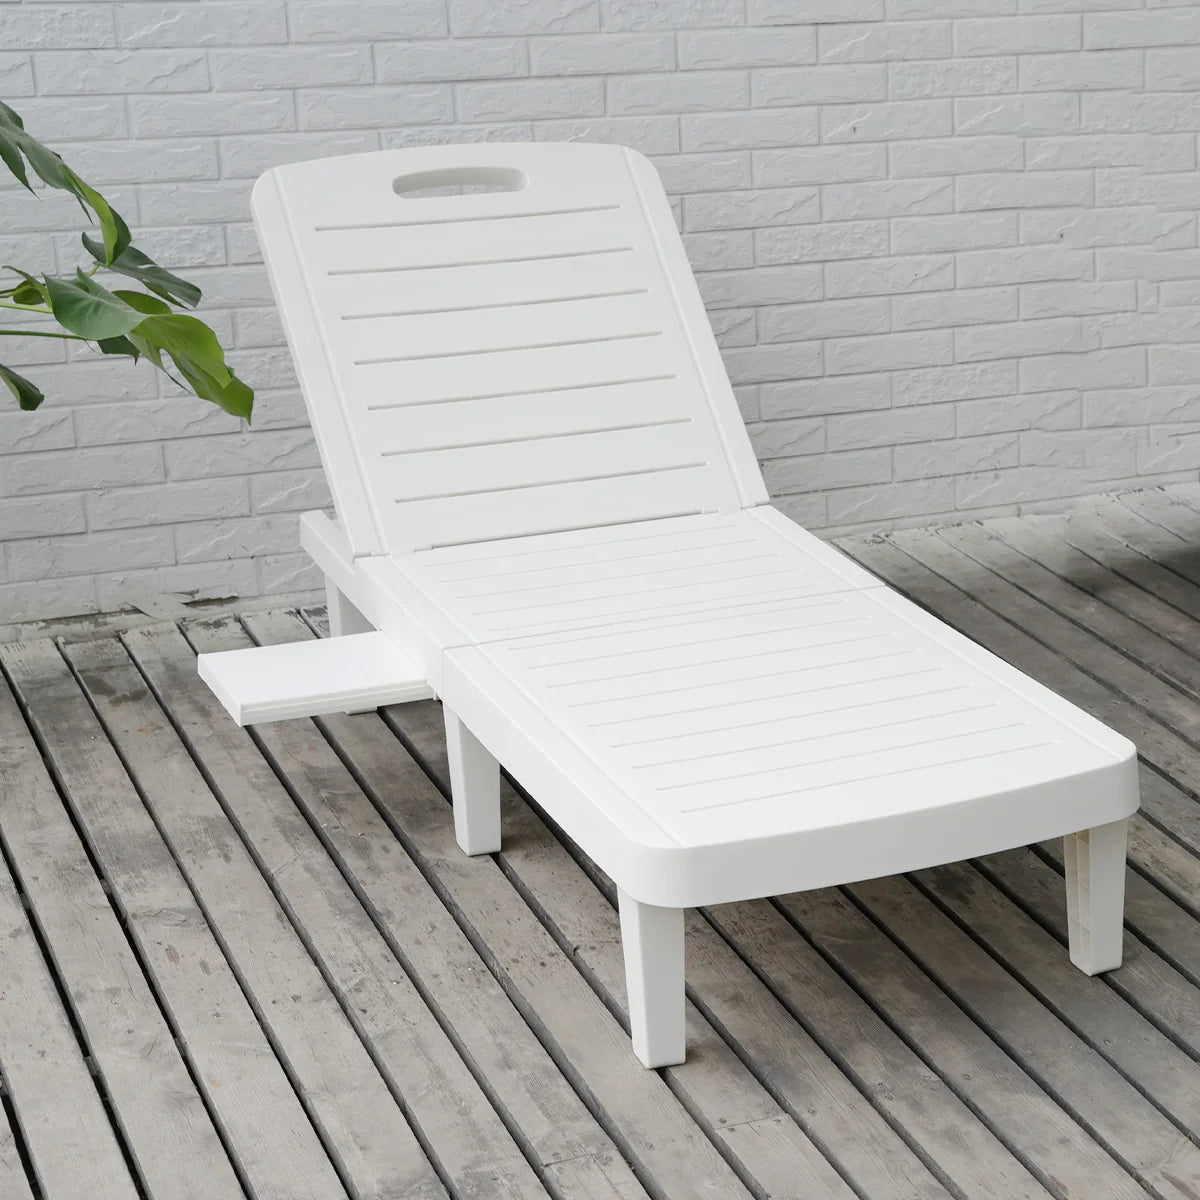 Outdoor Beach Pool Recliner with Adjustable Back with Shelving, White